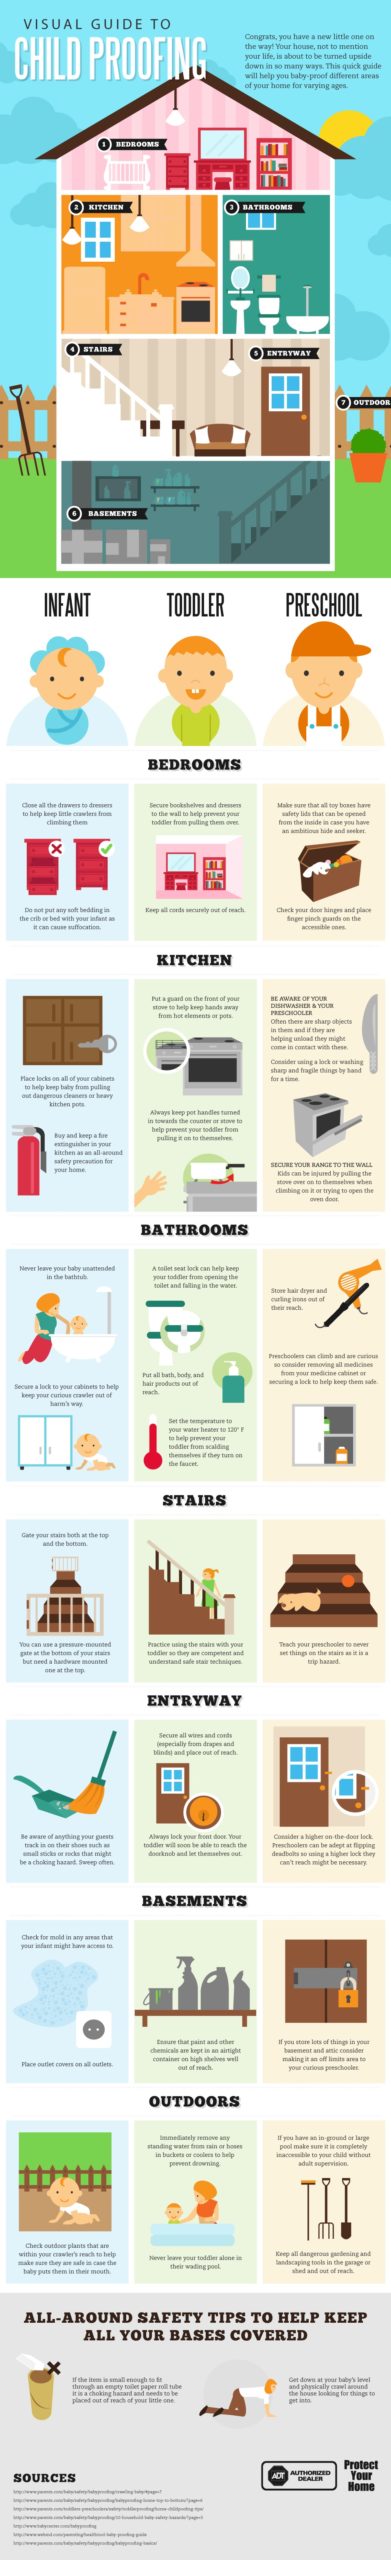 Keep Your Home Child-Safe With This Room-By-Room Infographic